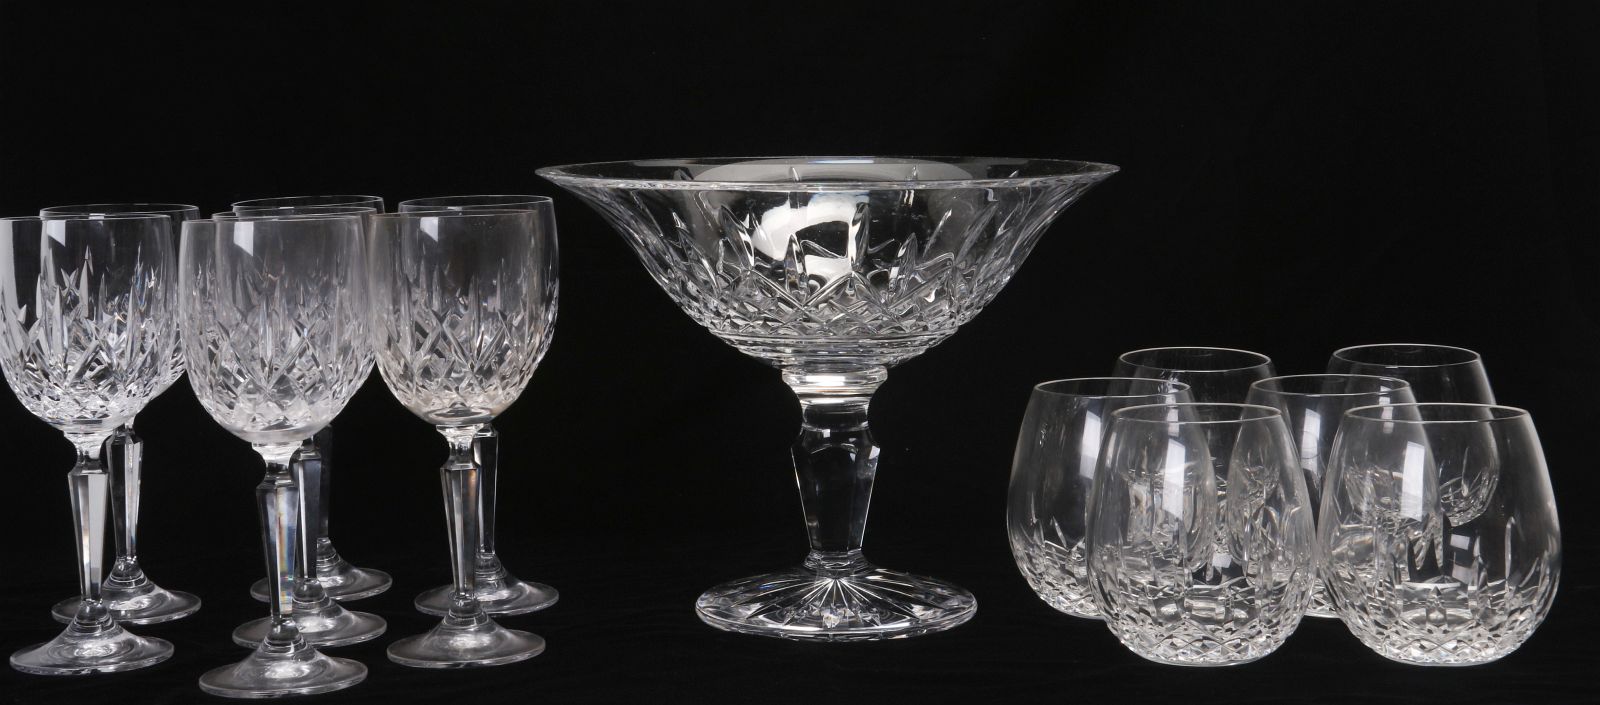 FOURTEEN PIECES WATERFORD LISMORE PATTERN CRYSTAL